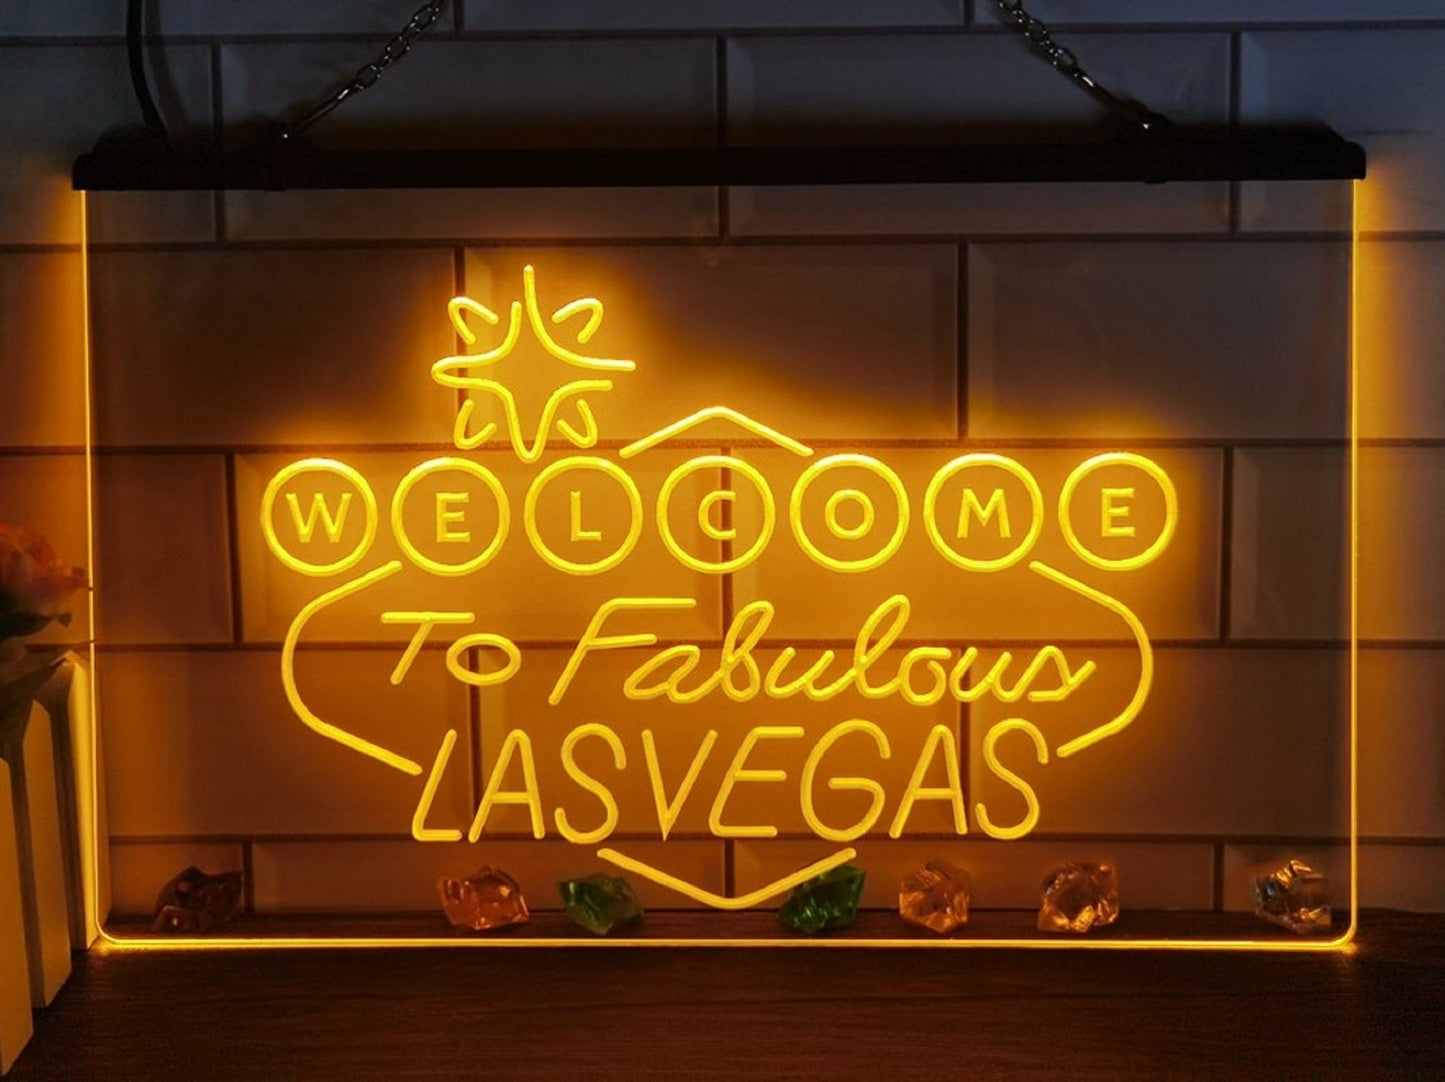 Neon Sign Welcome to Las Vegas Wall Hanging Table Top Home Decor